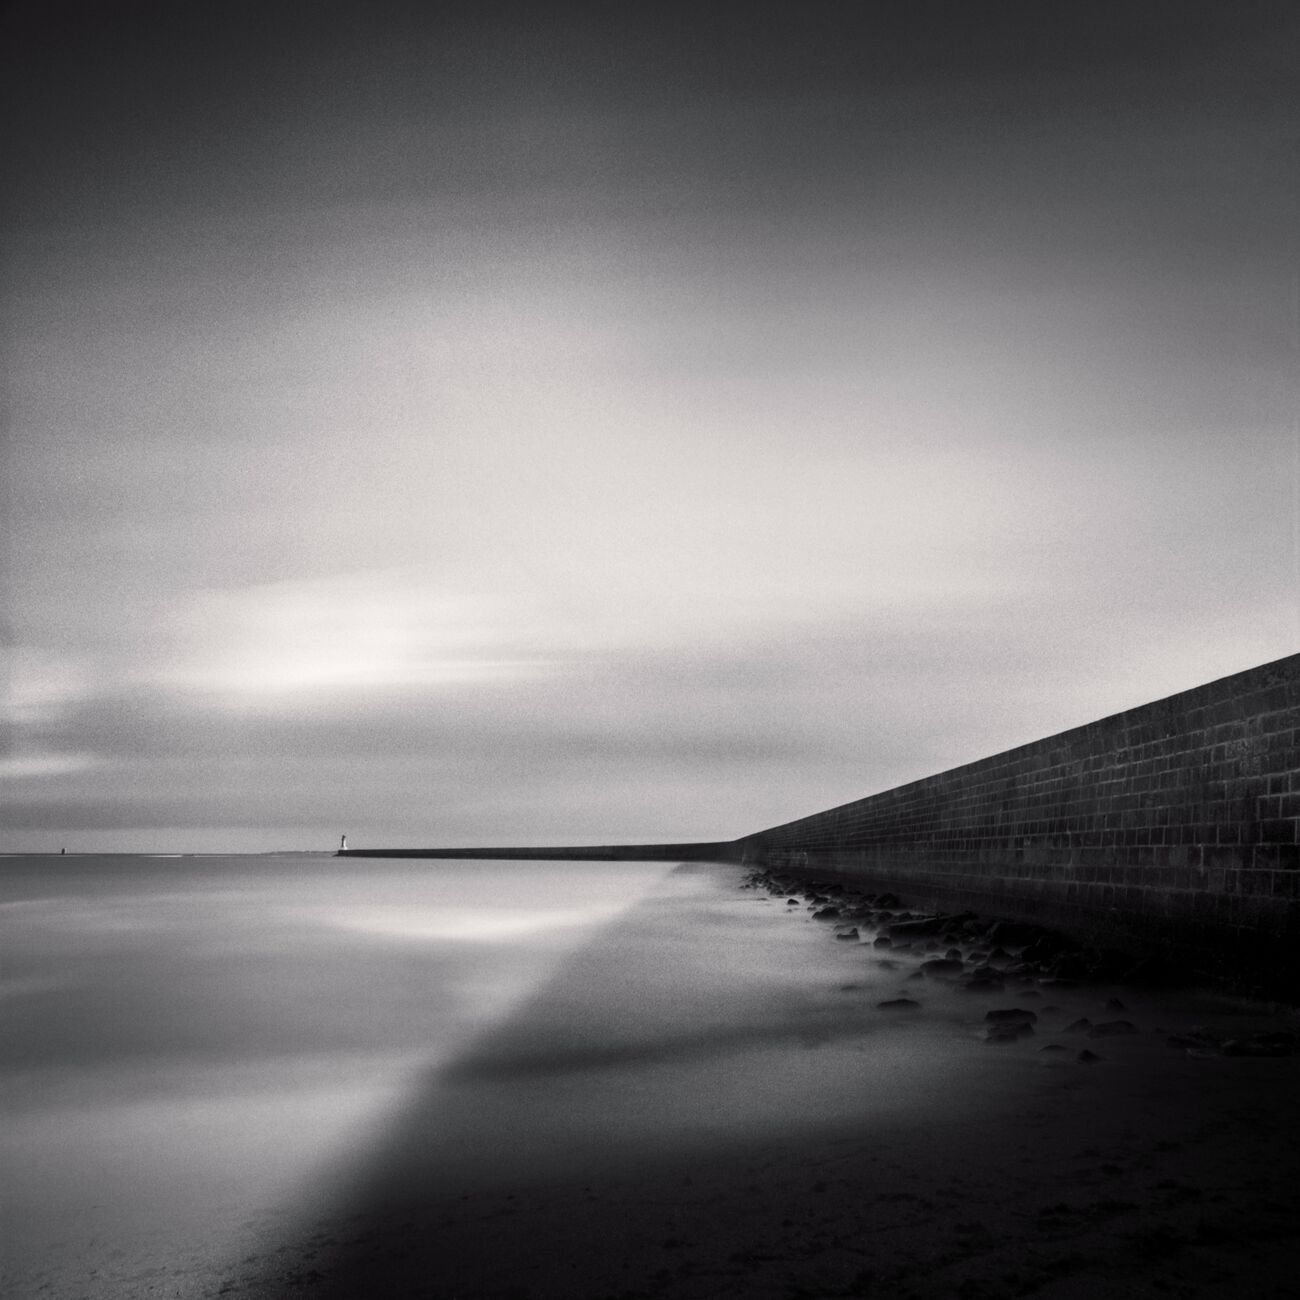 Pier Shadow, Le Croisic, France. May 2021. Ref-11454 - Denis Olivier Photography